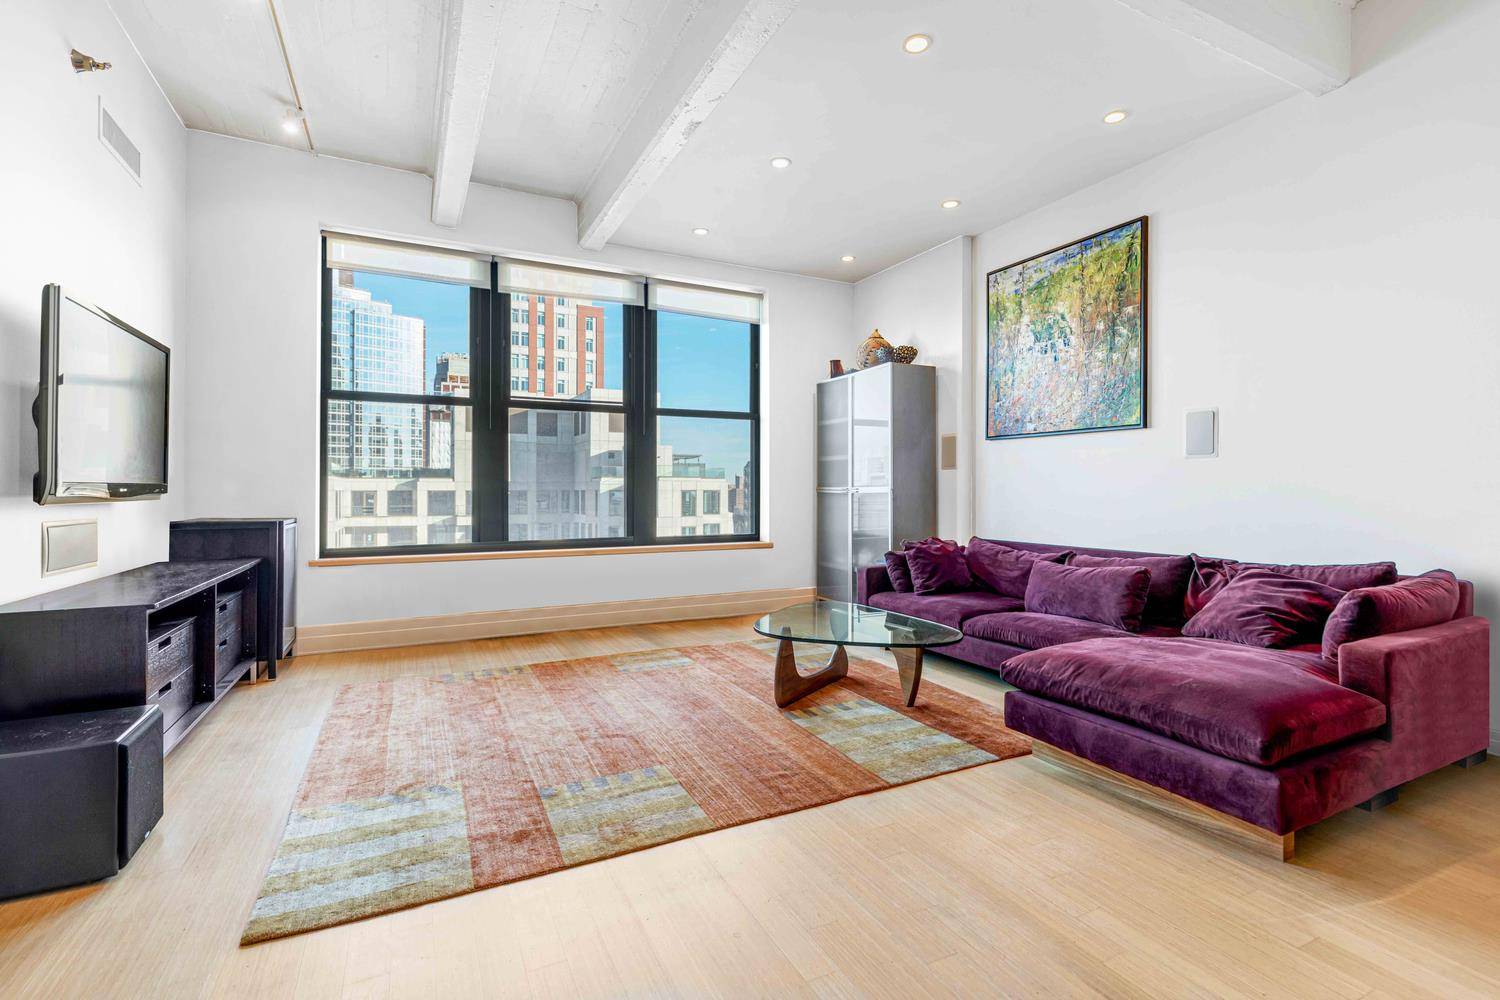 CHIC DUMBO LUXURY LOFT ! Perched up high, Residence 10A offers sleek loft style living in the heart of Dumbo.